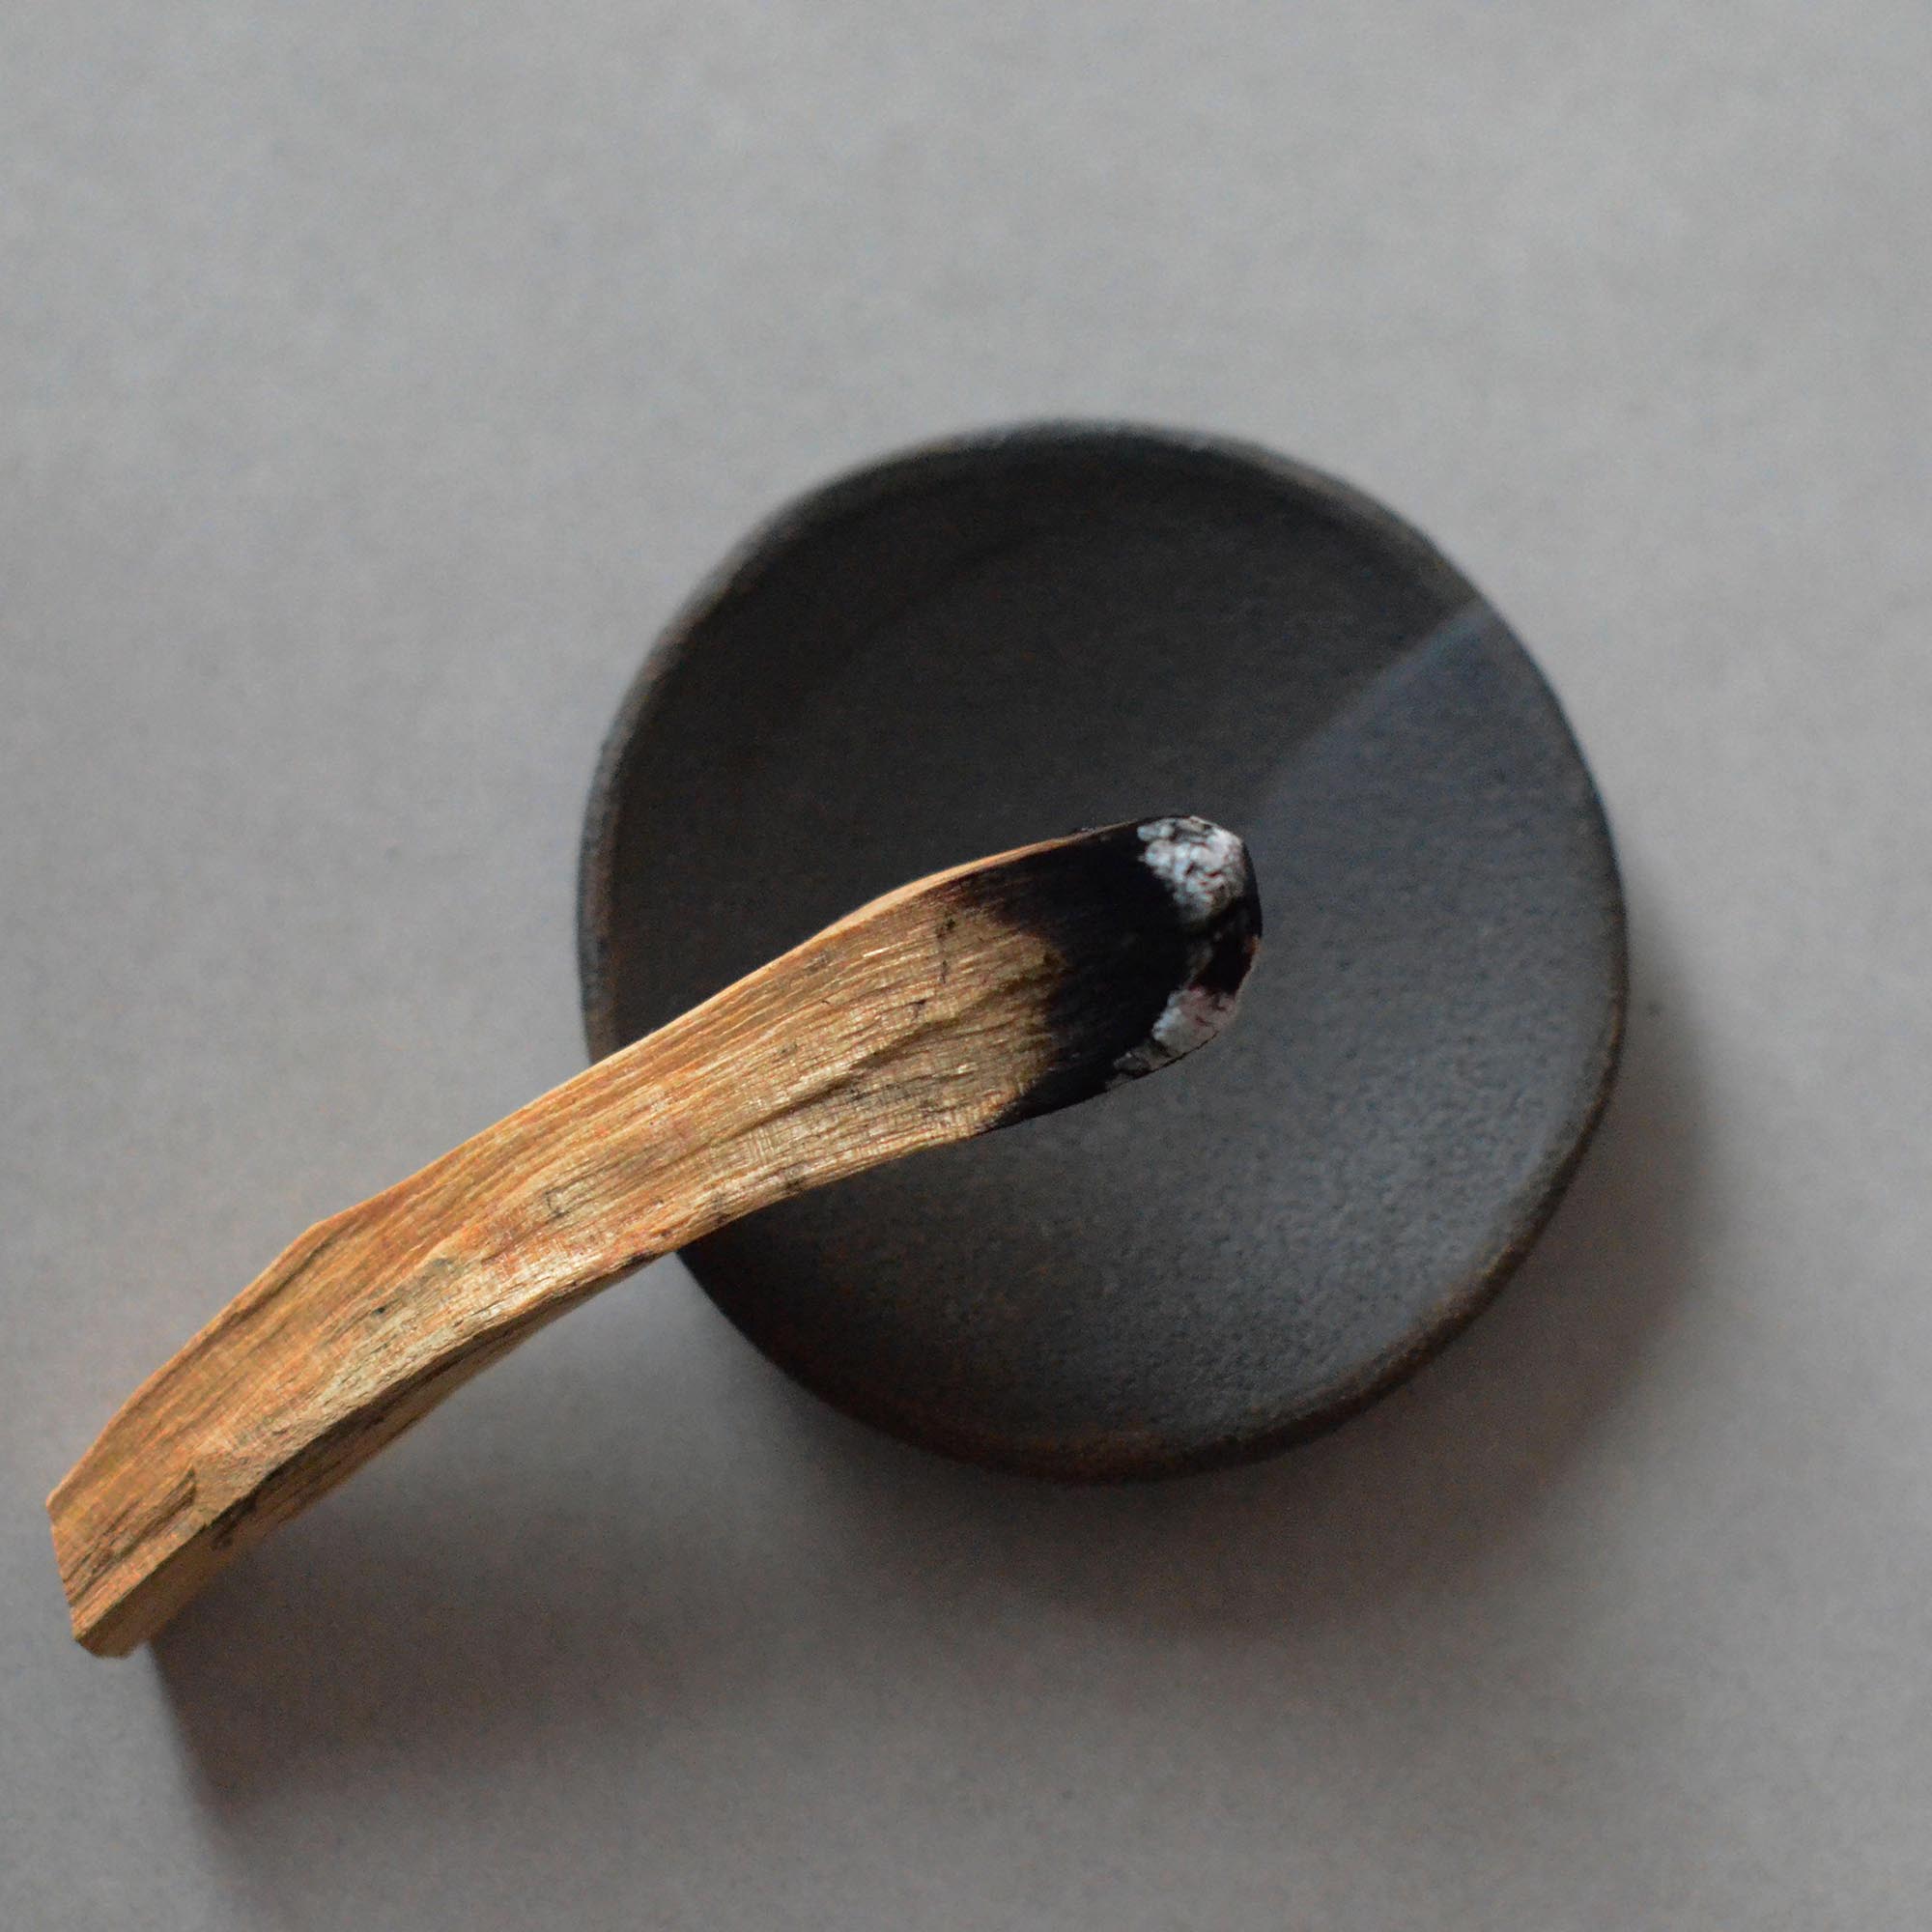 wood incense stick and a plate for incense